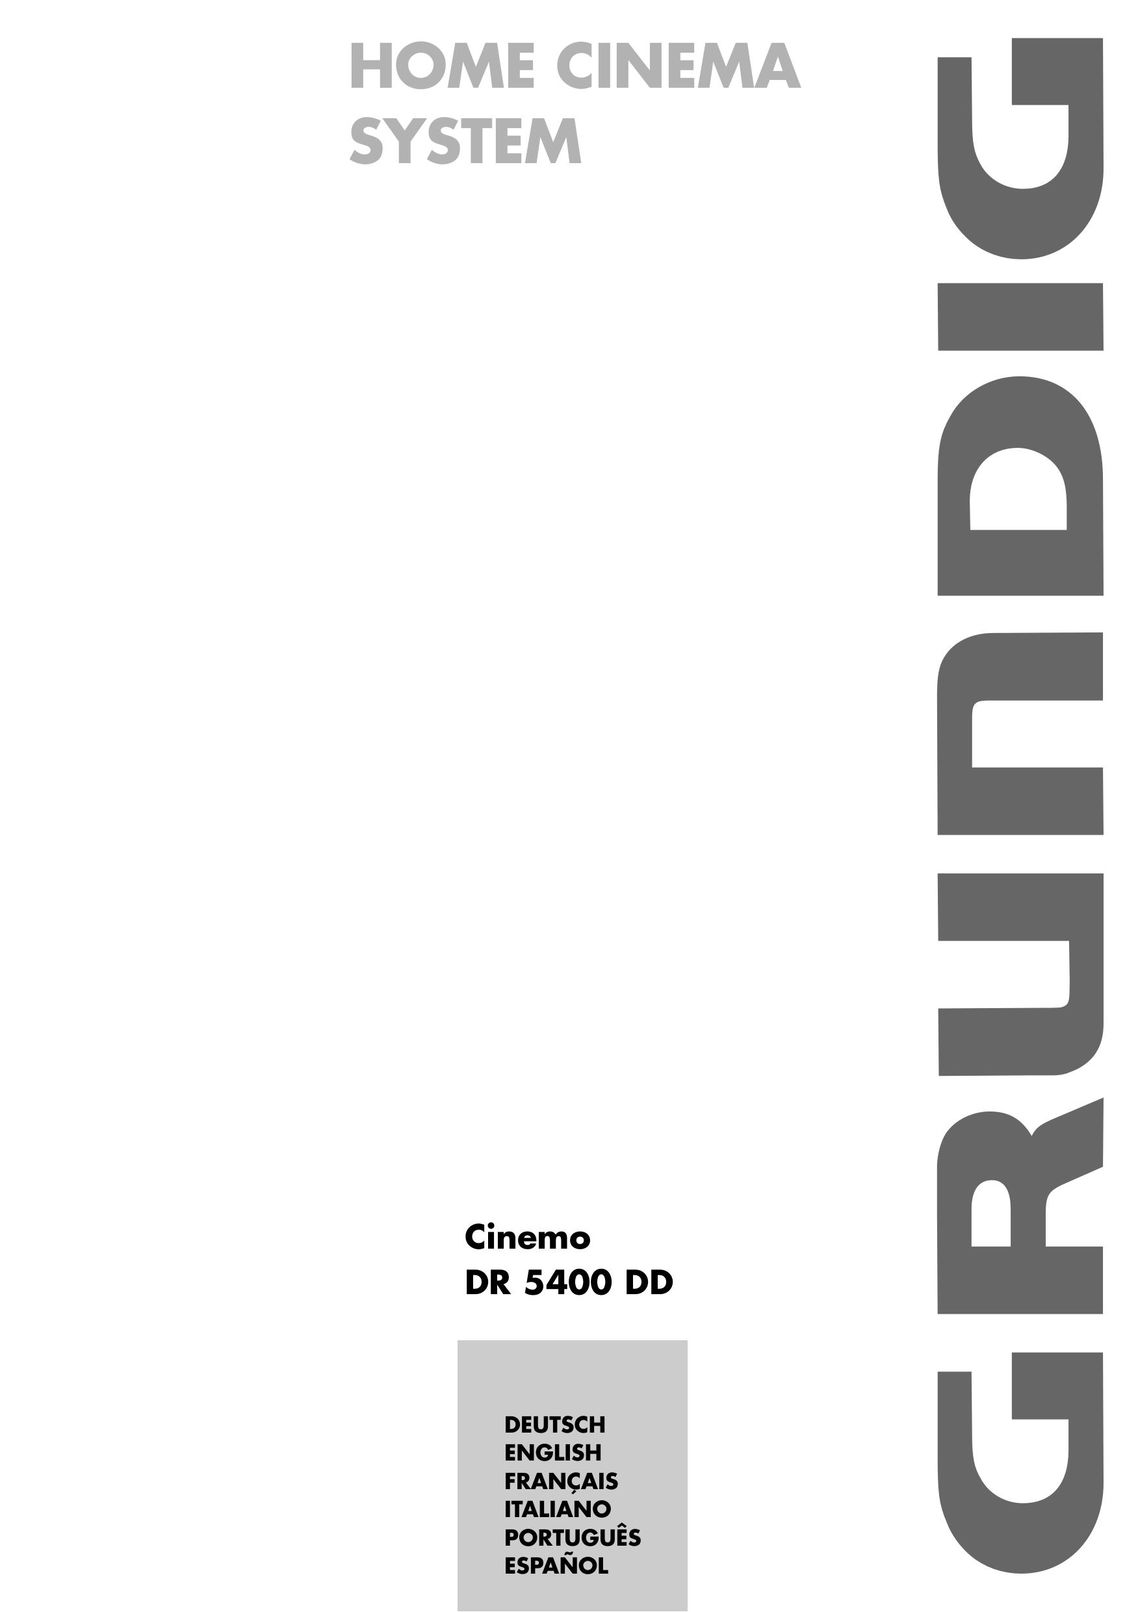 Grundig dr 5400 dd Home Theater System User Manual (Page 1)